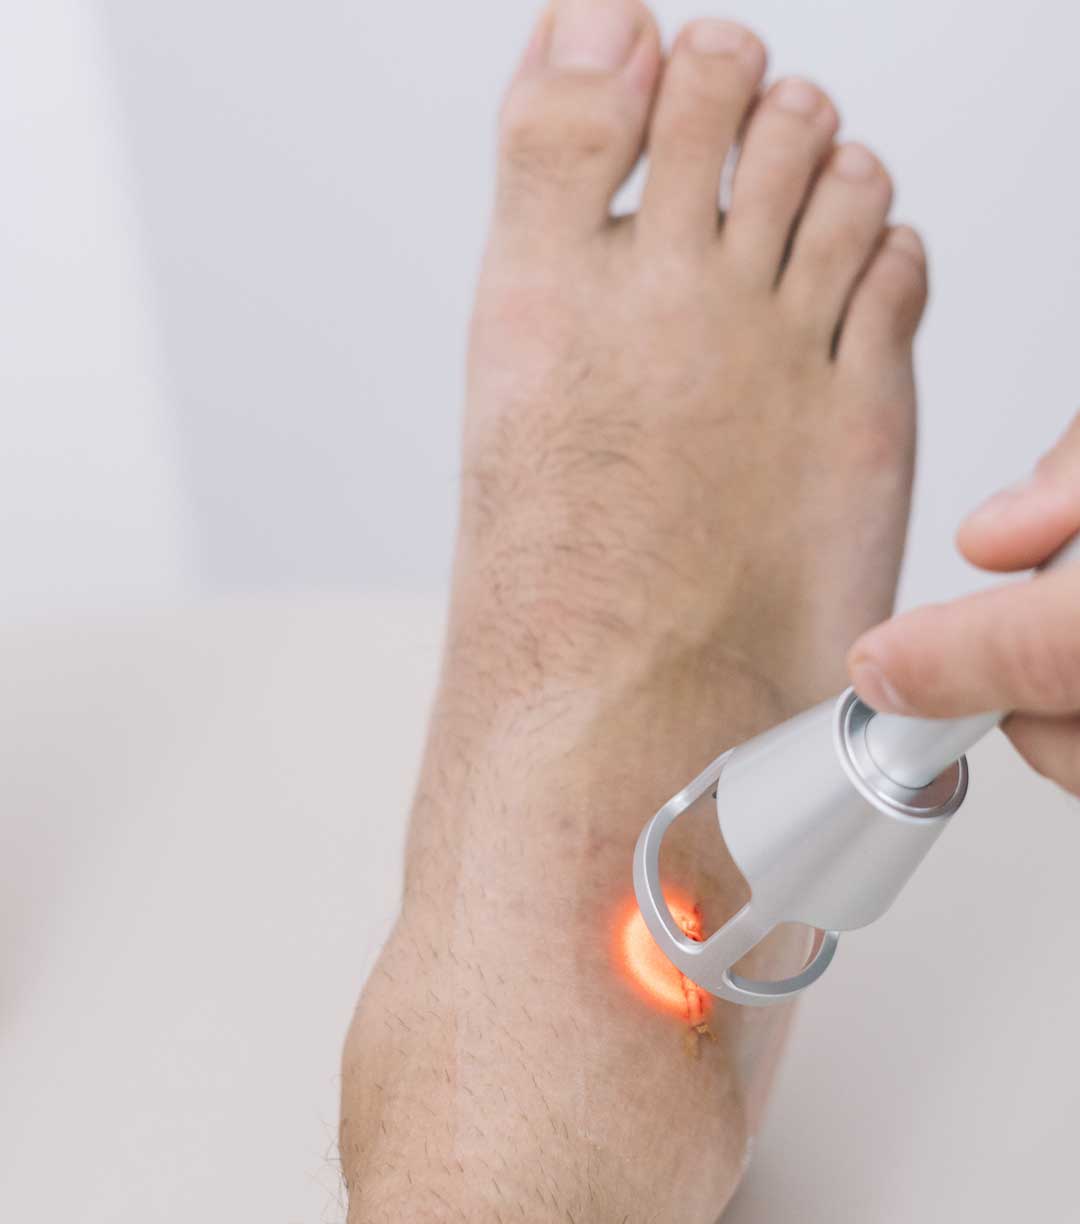 Low-level laser therapy (LLLT)